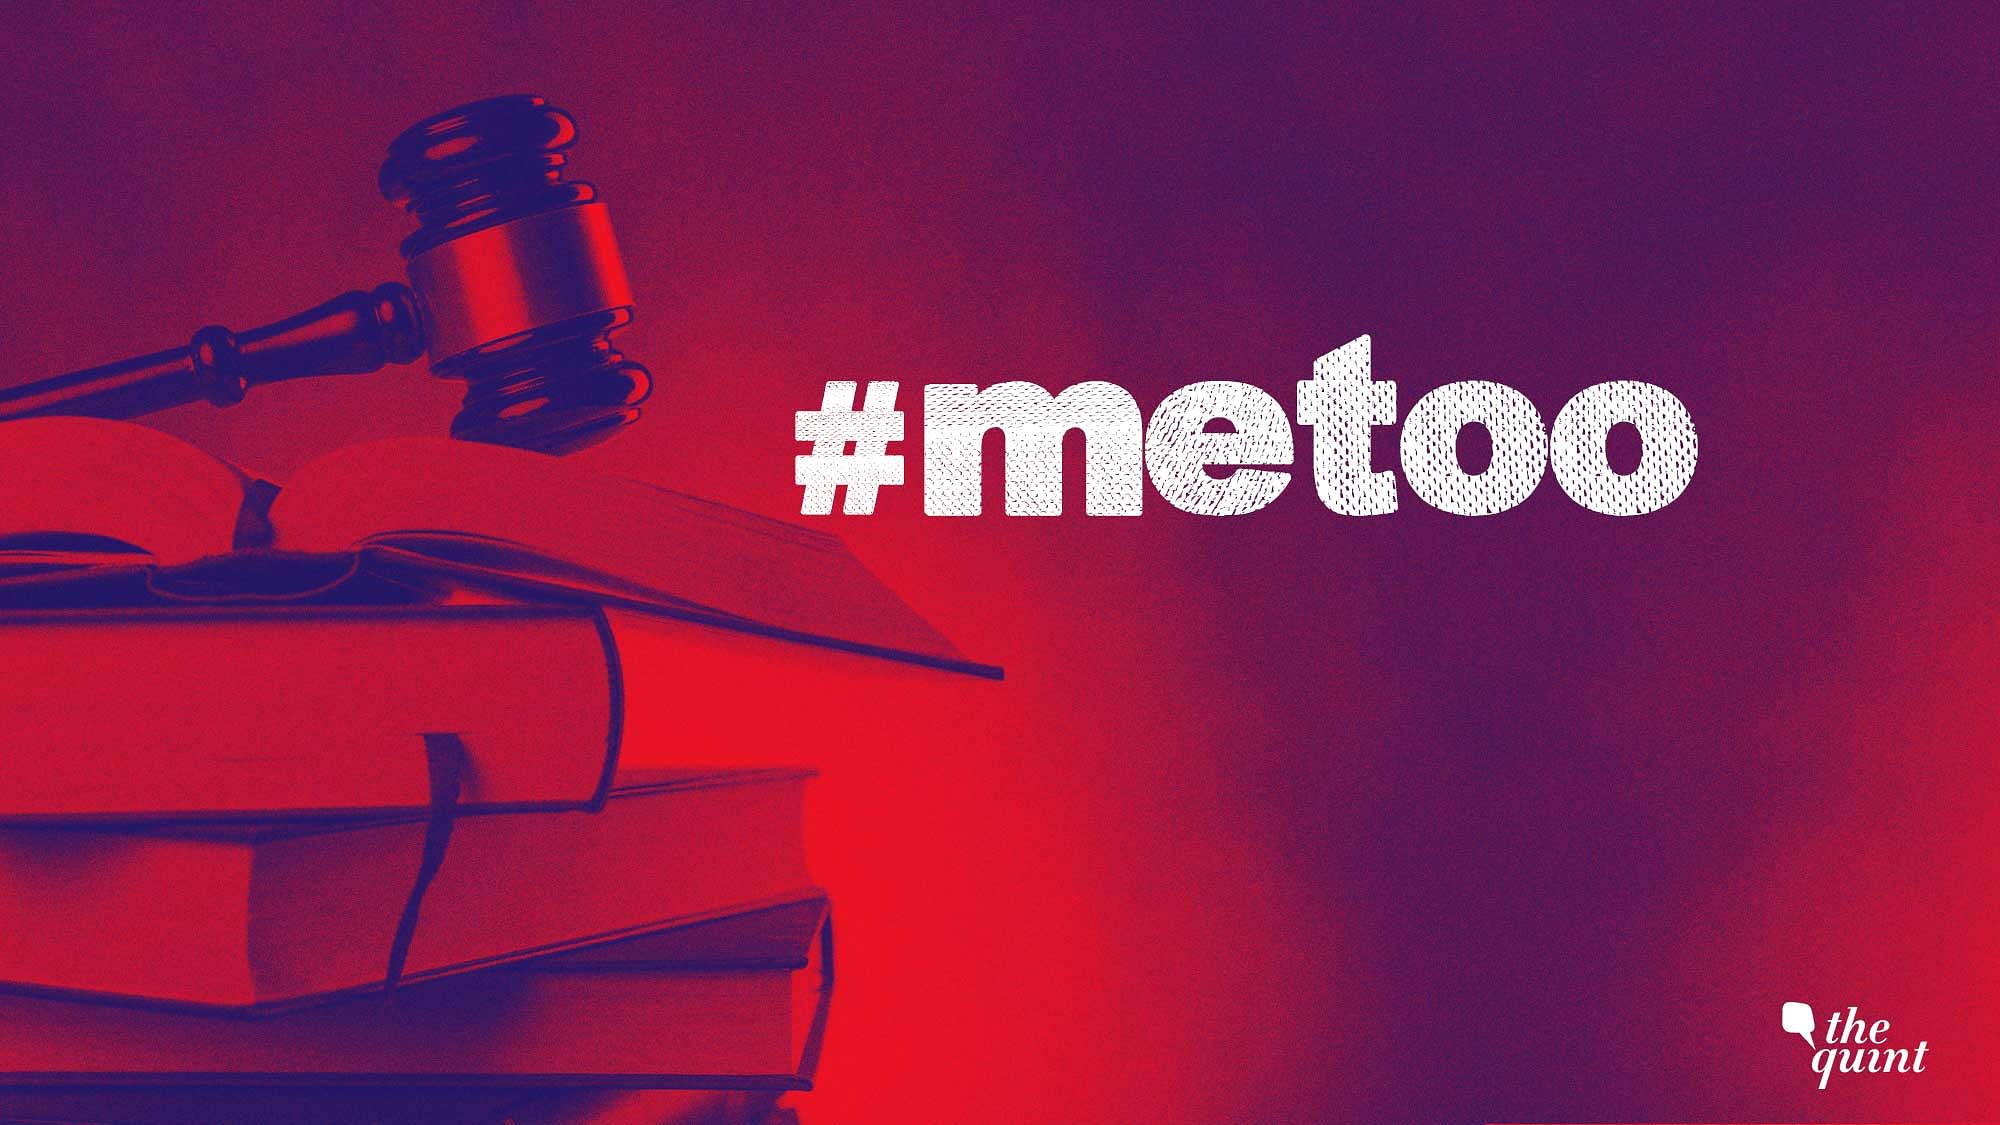 The law graduate was found dead in her PG room, four days after she filed her #MeToo plaint with the police.&nbsp;